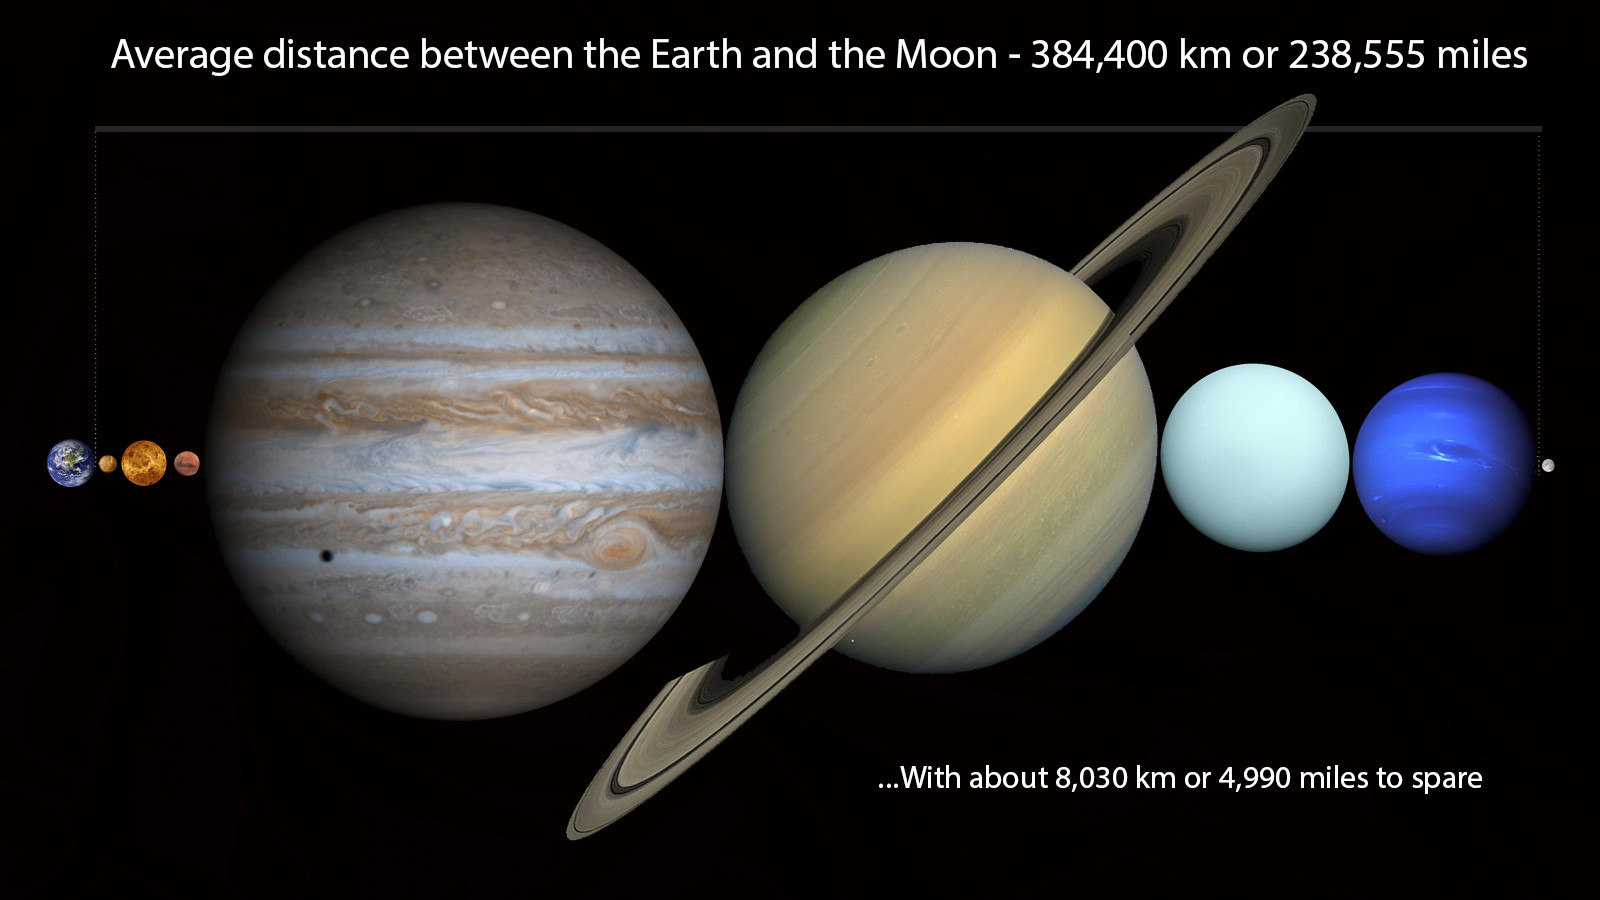 Graphic showing planets to scale with text indicating the average Earth-Moon distance with space remaining